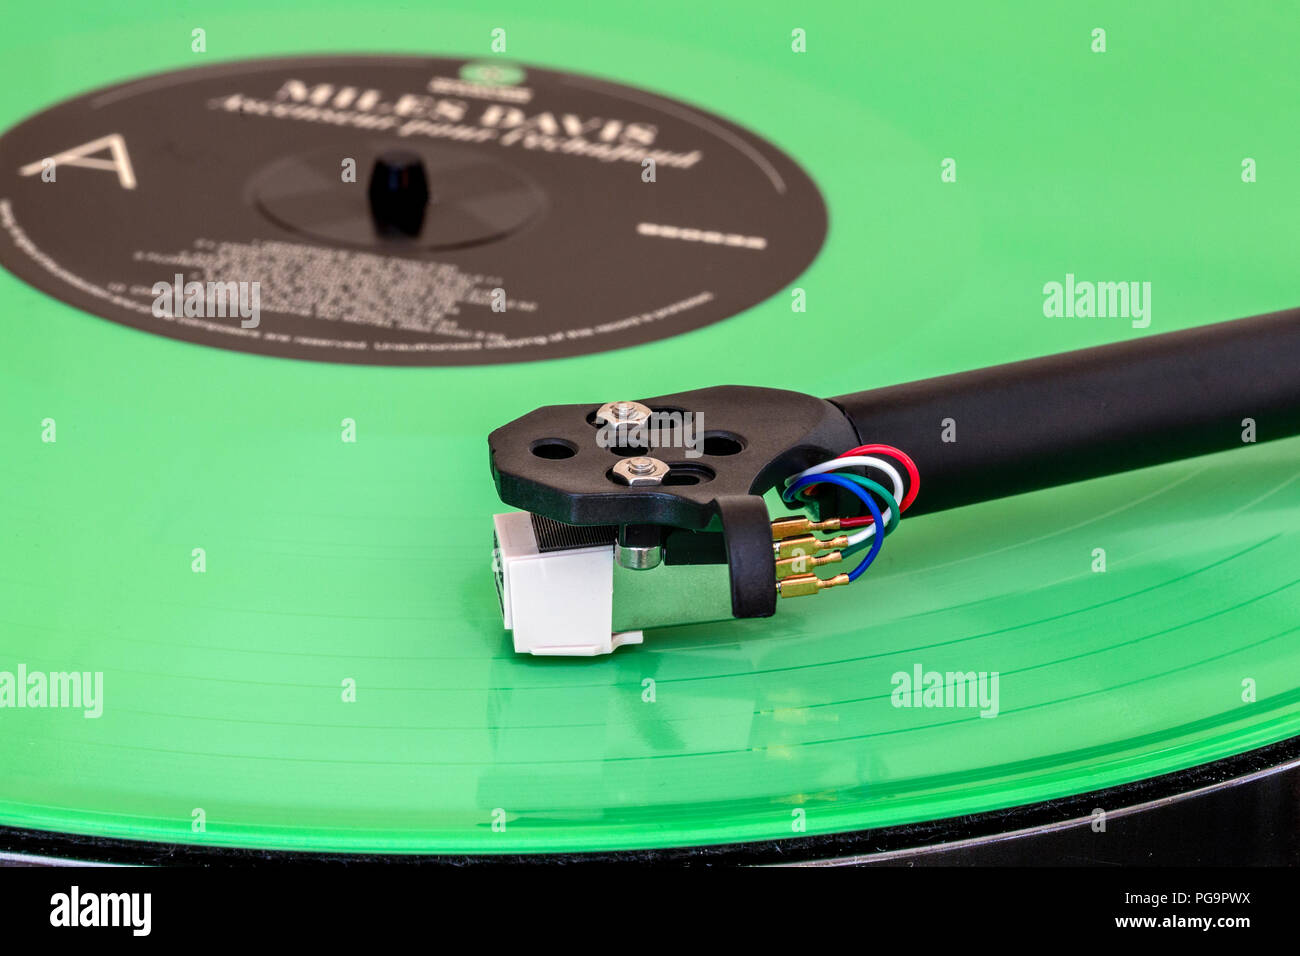 Hifi turntable with tonearm, cartridge and stylus playing on color vinyl record Stock Photo